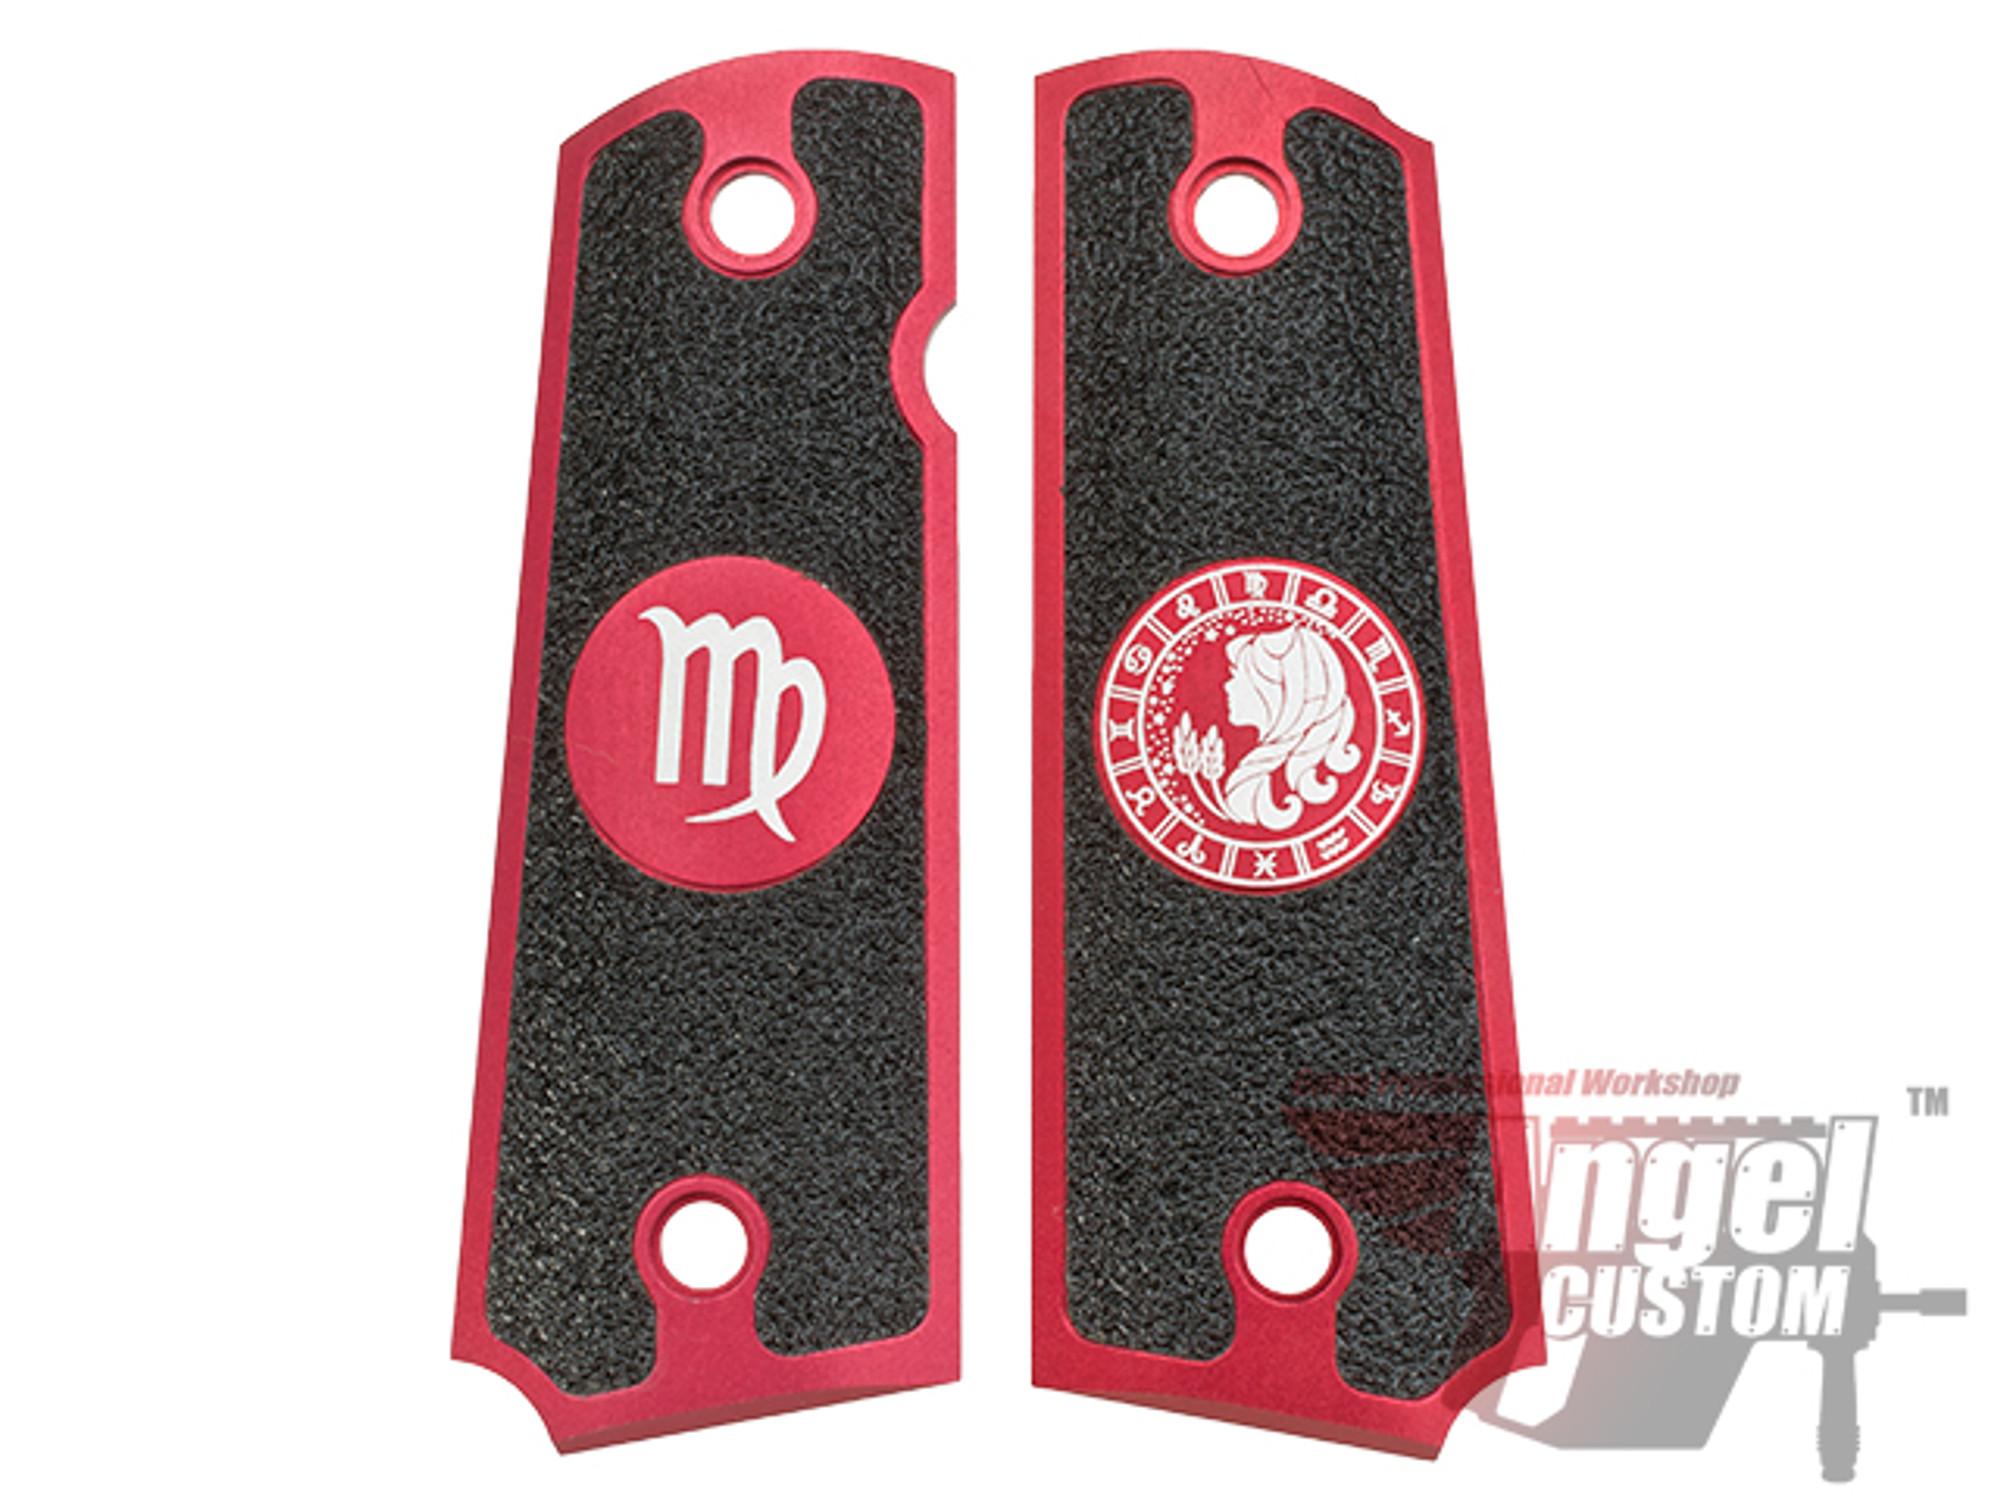 Angel Custom CNC Machined Tac-Glove "Zodiac" Grips for WE-Tech 1911 Series Airsoft Pistols - Virgo (Red)